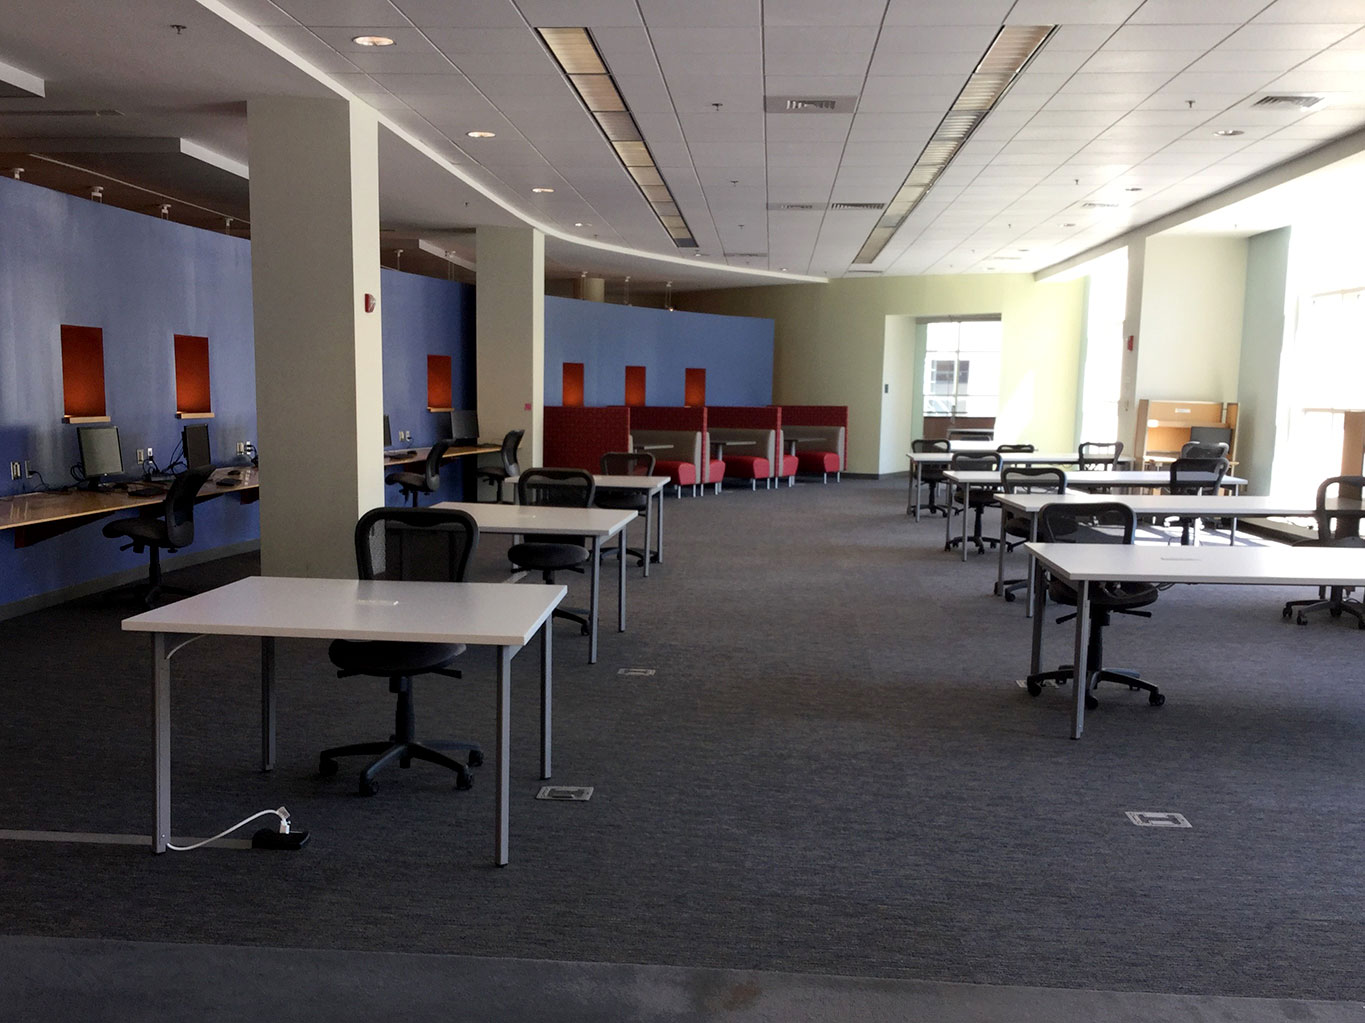 New furniture at the library